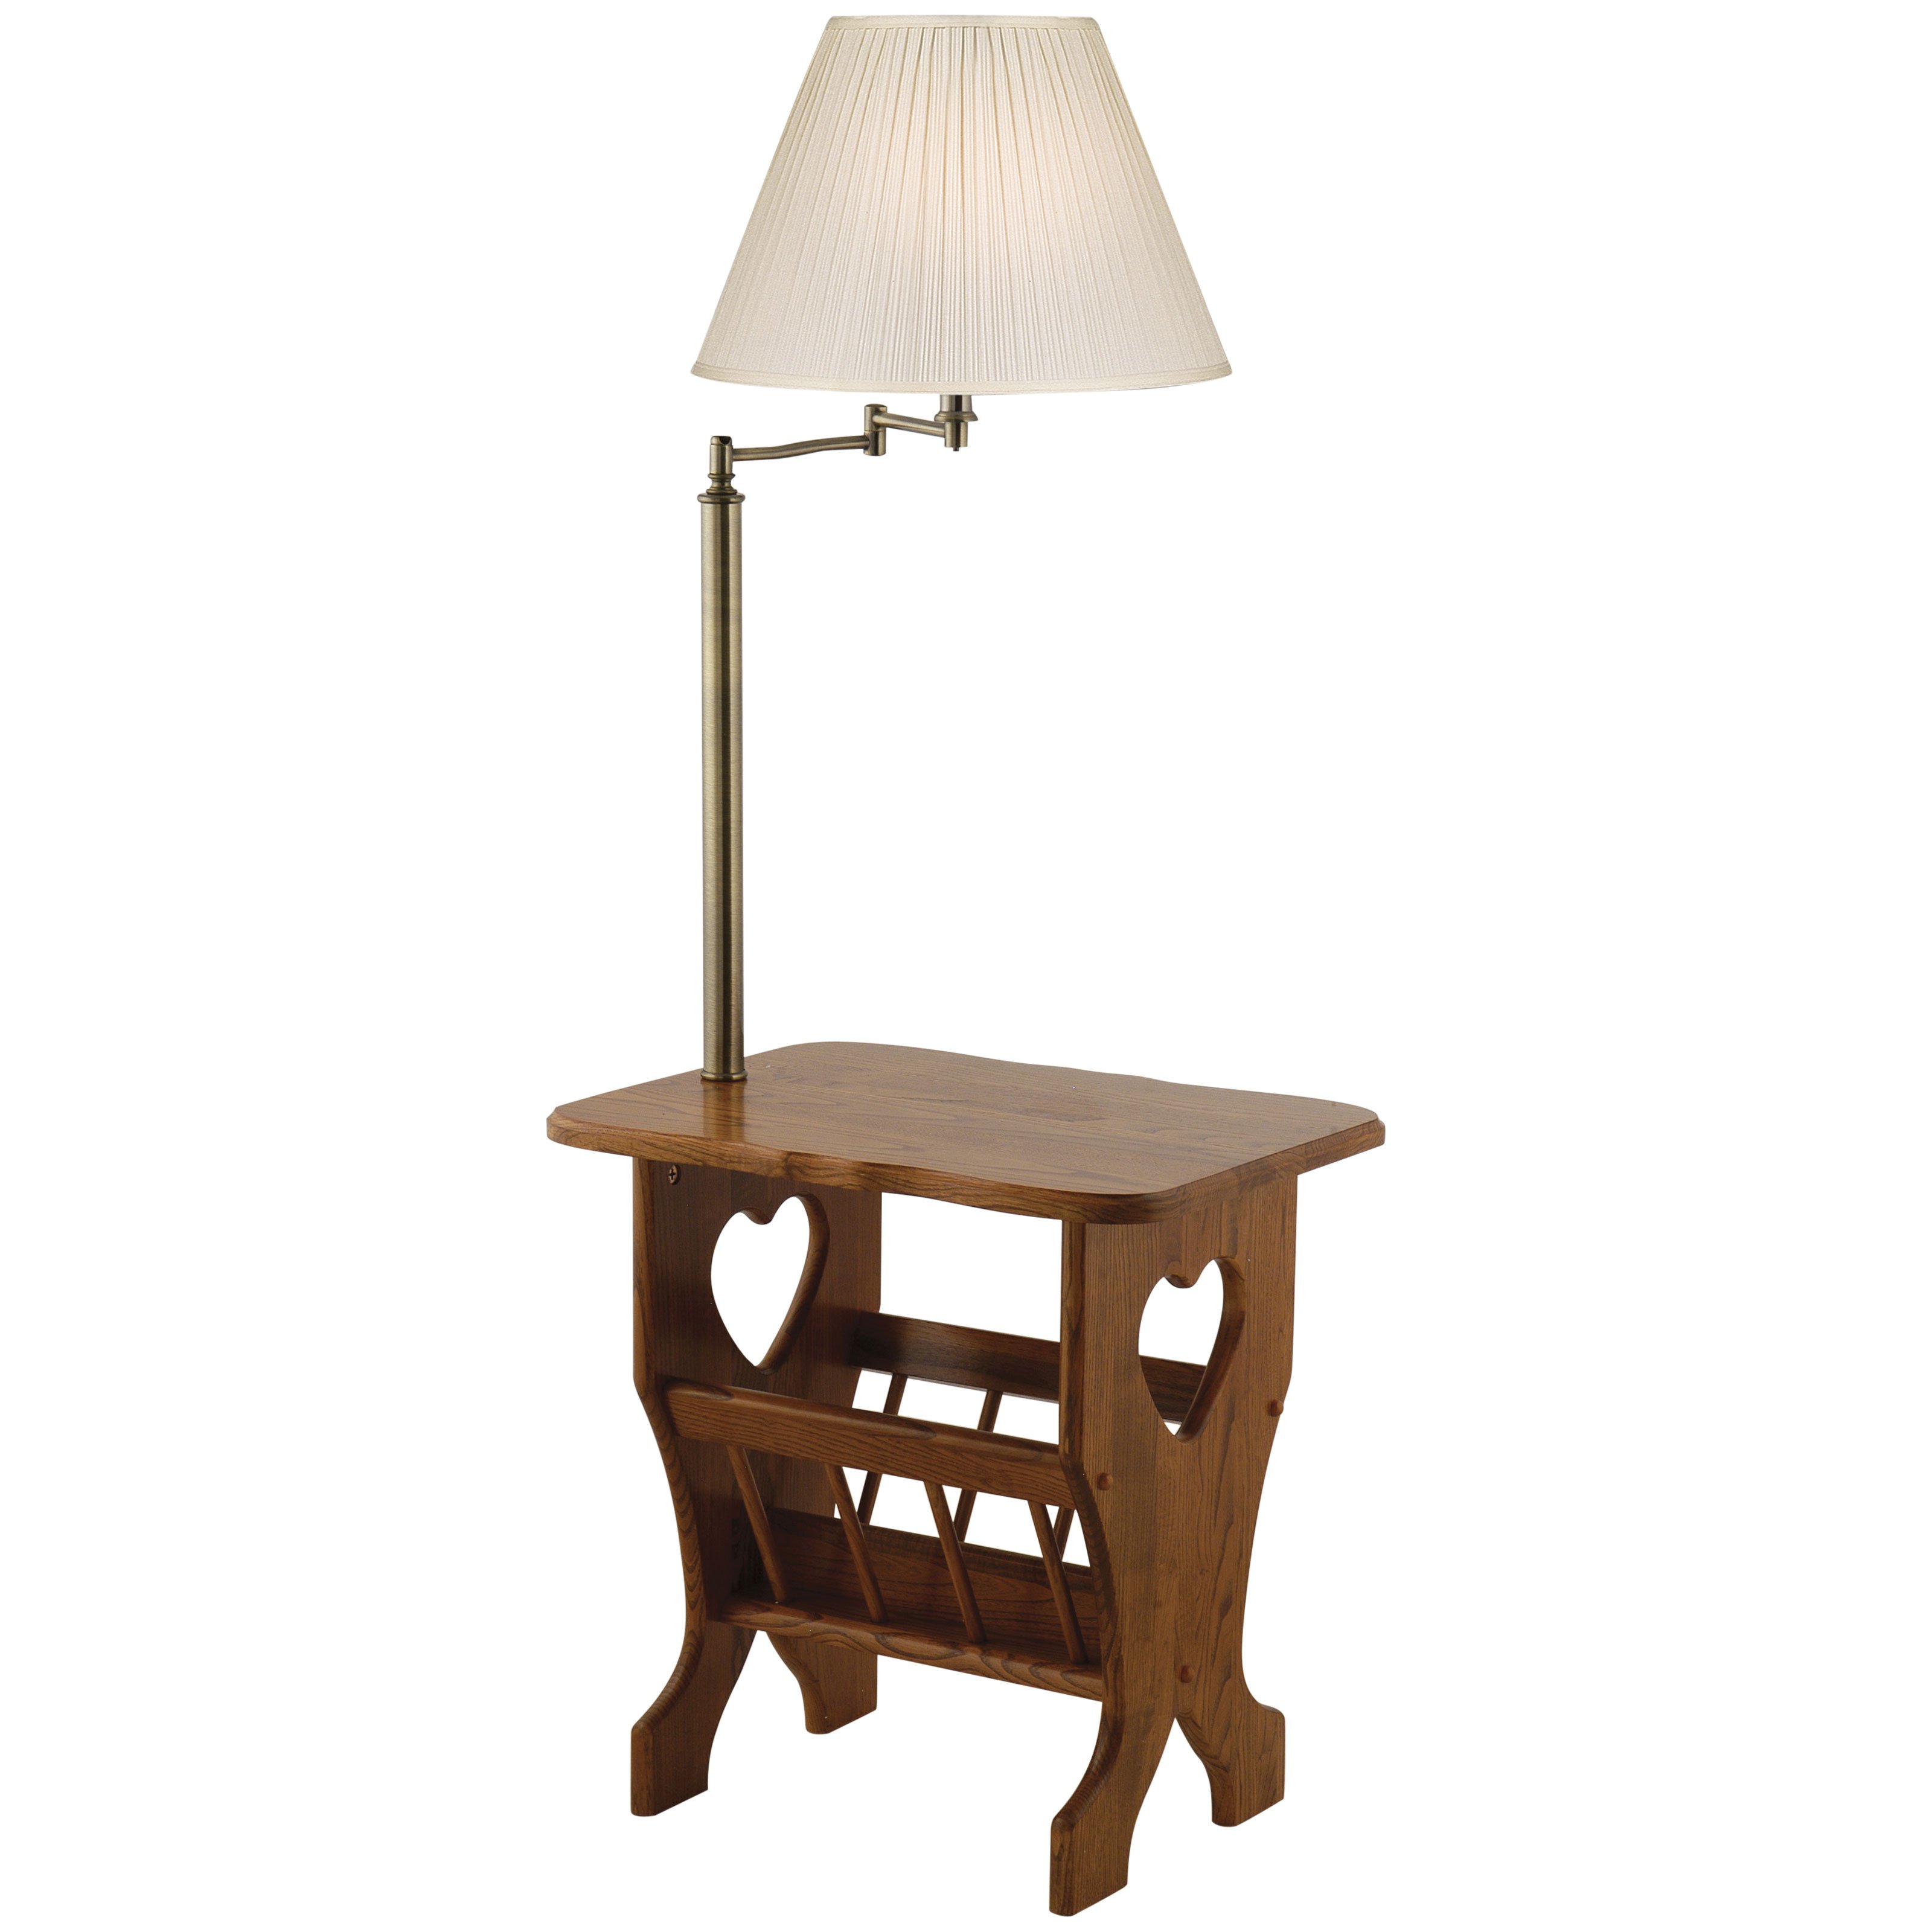 floor lamp with table attached photo - 5